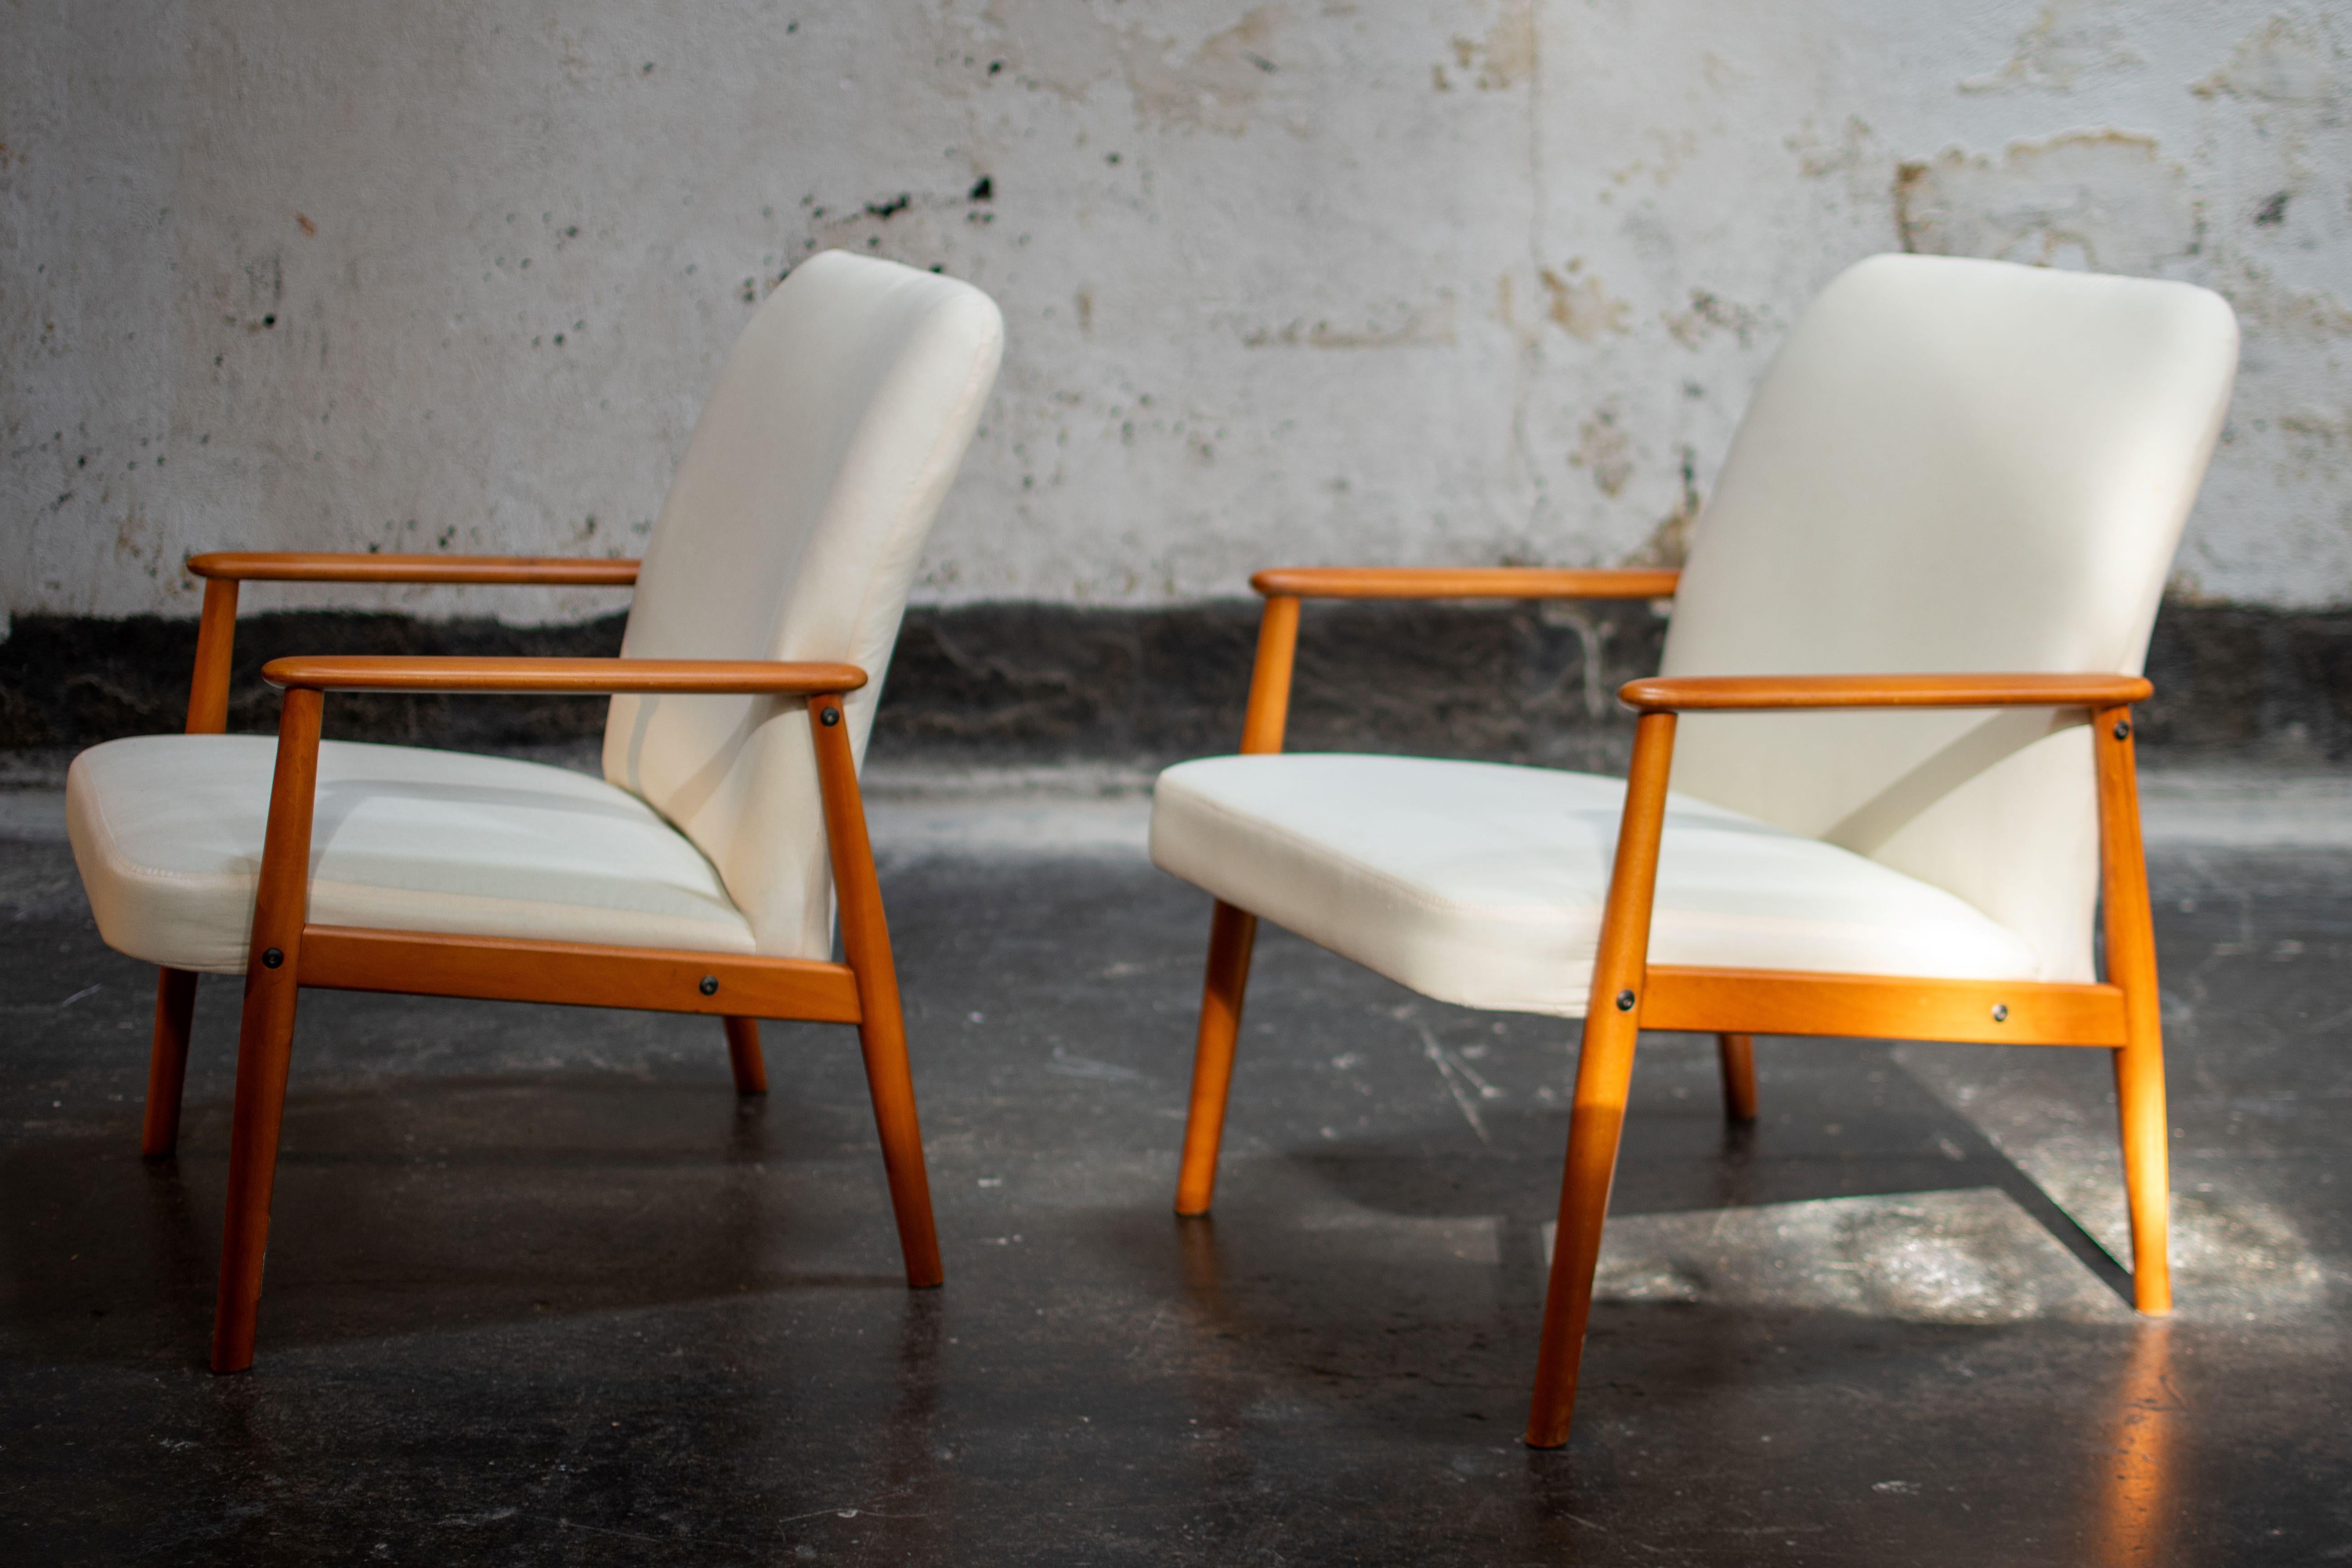 Pair of Scandinavian Modern Chairs - COM Ready In Good Condition For Sale In Atlanta, GA